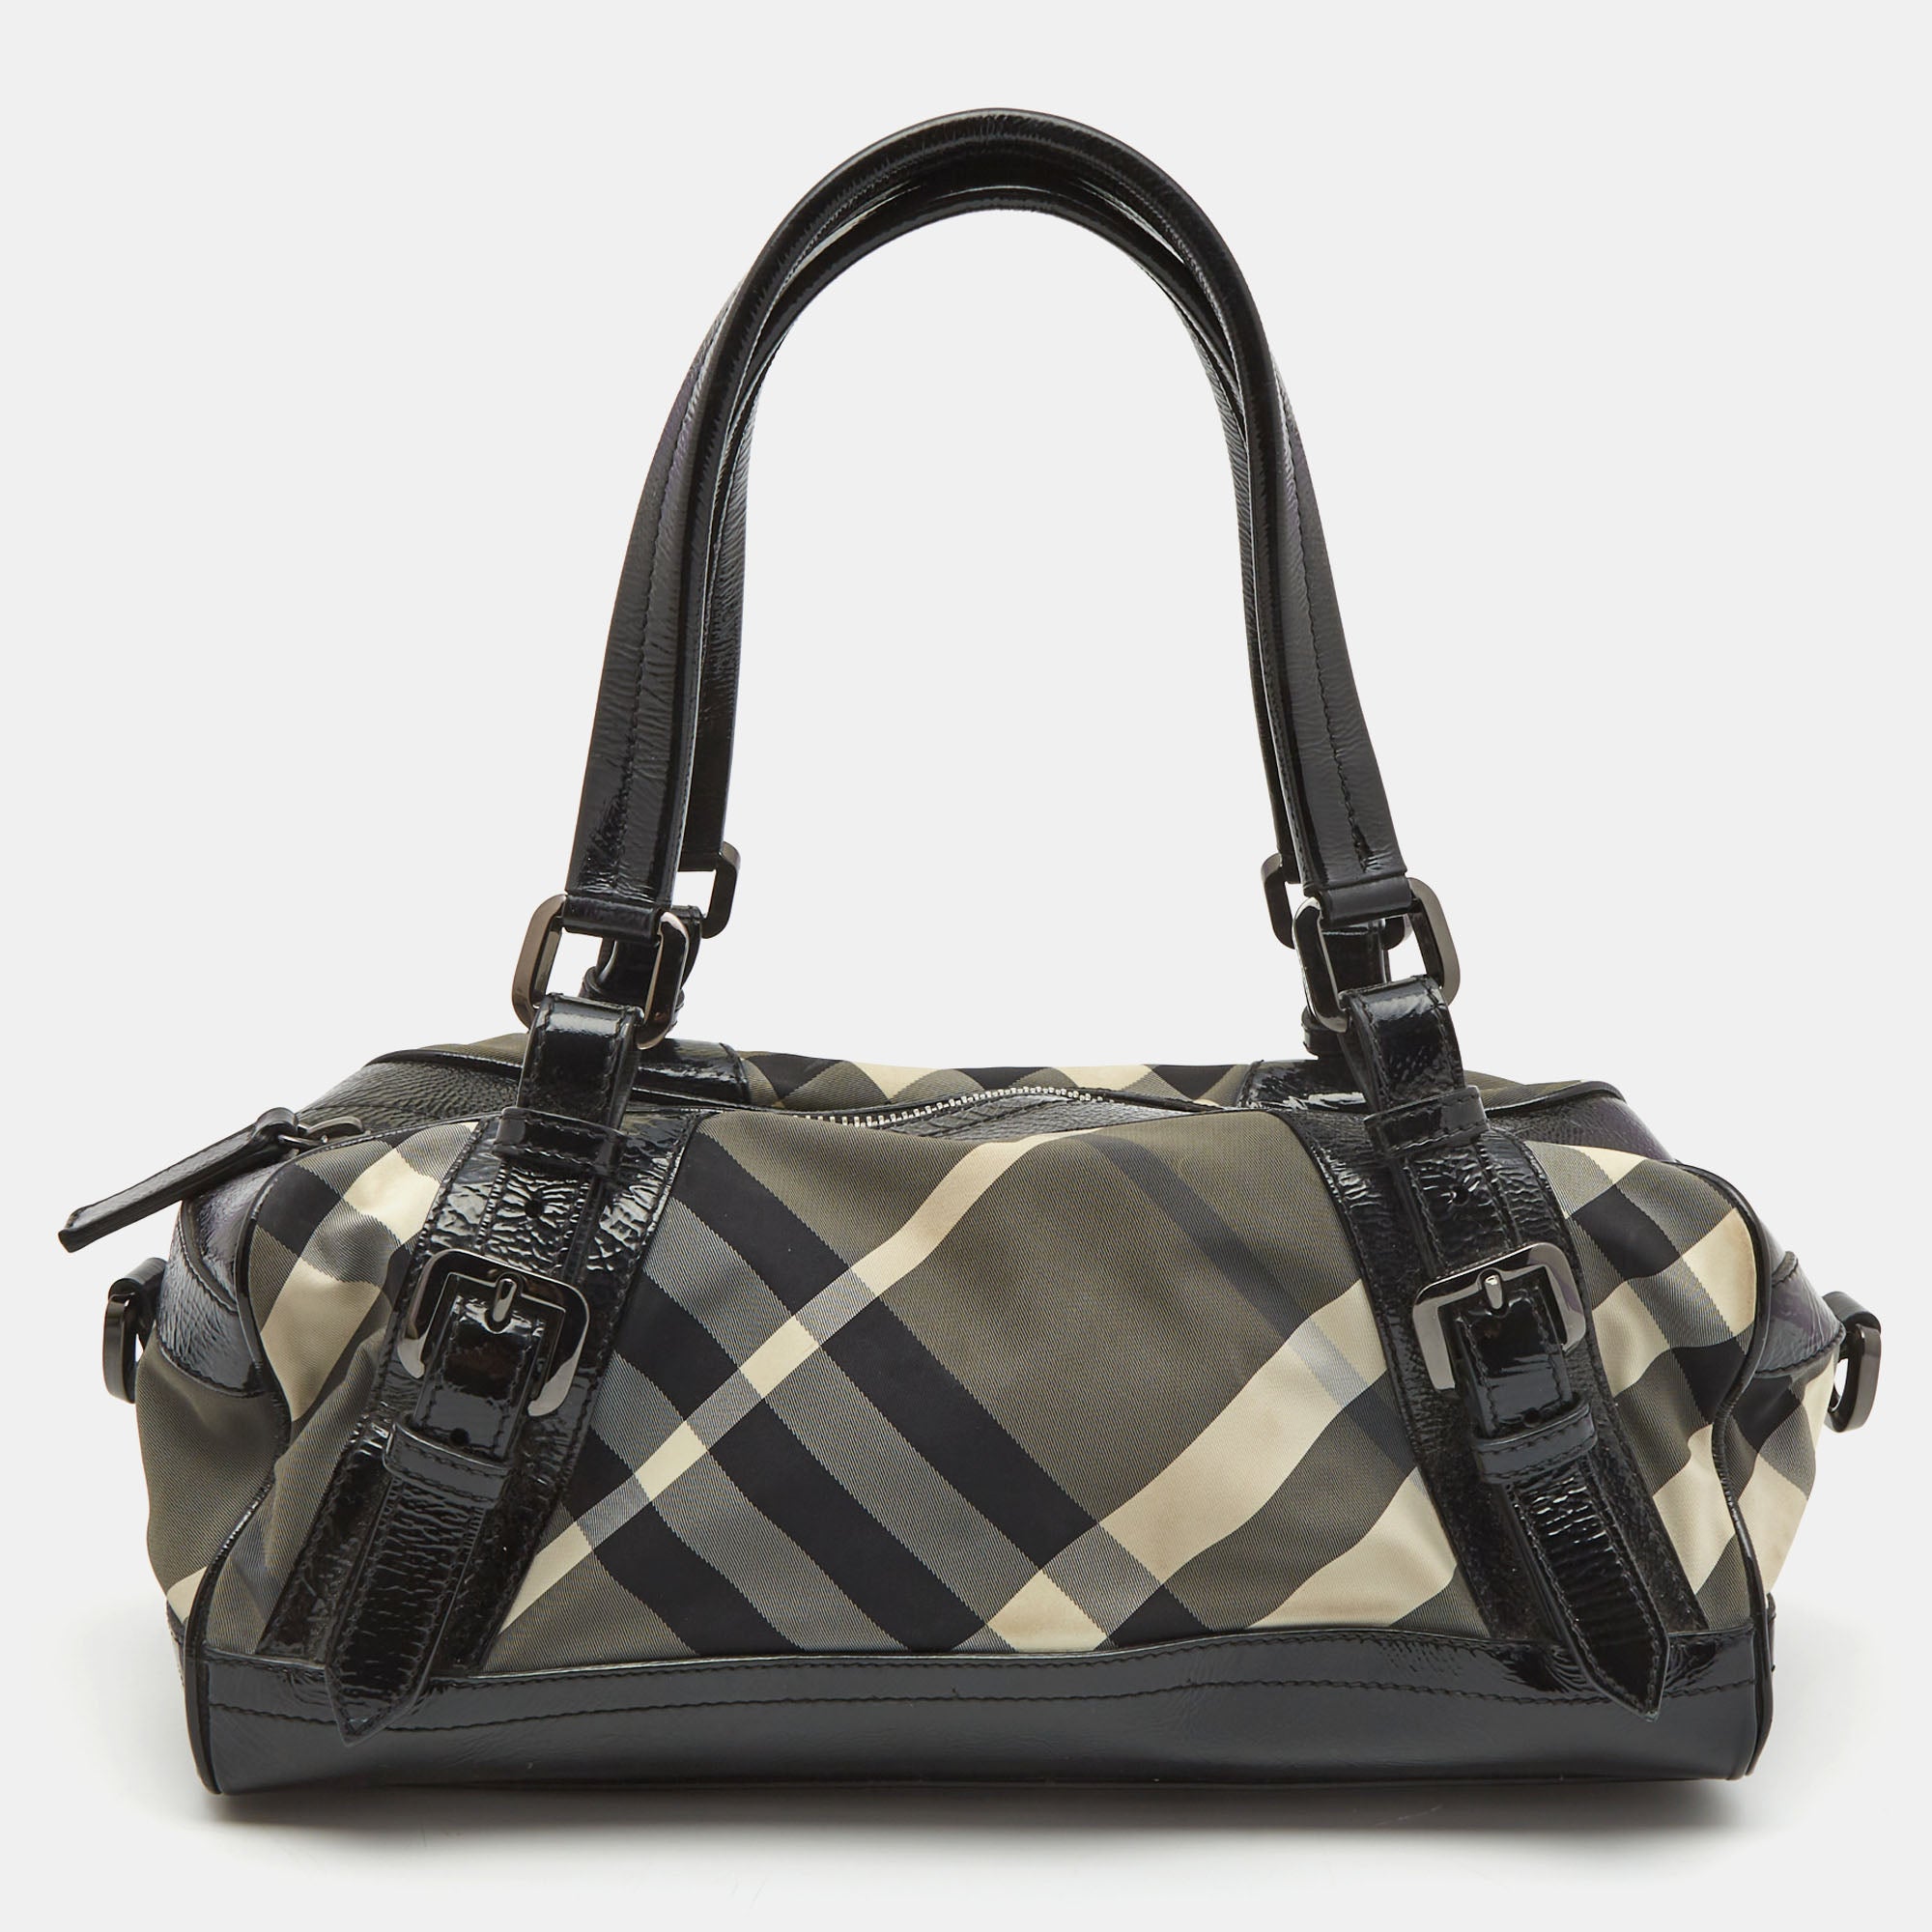 Burberry Woman's Bags Black Friday | Black Friday Burberry Bags for Woman  2023: buy online now at GIGLIO.COM!